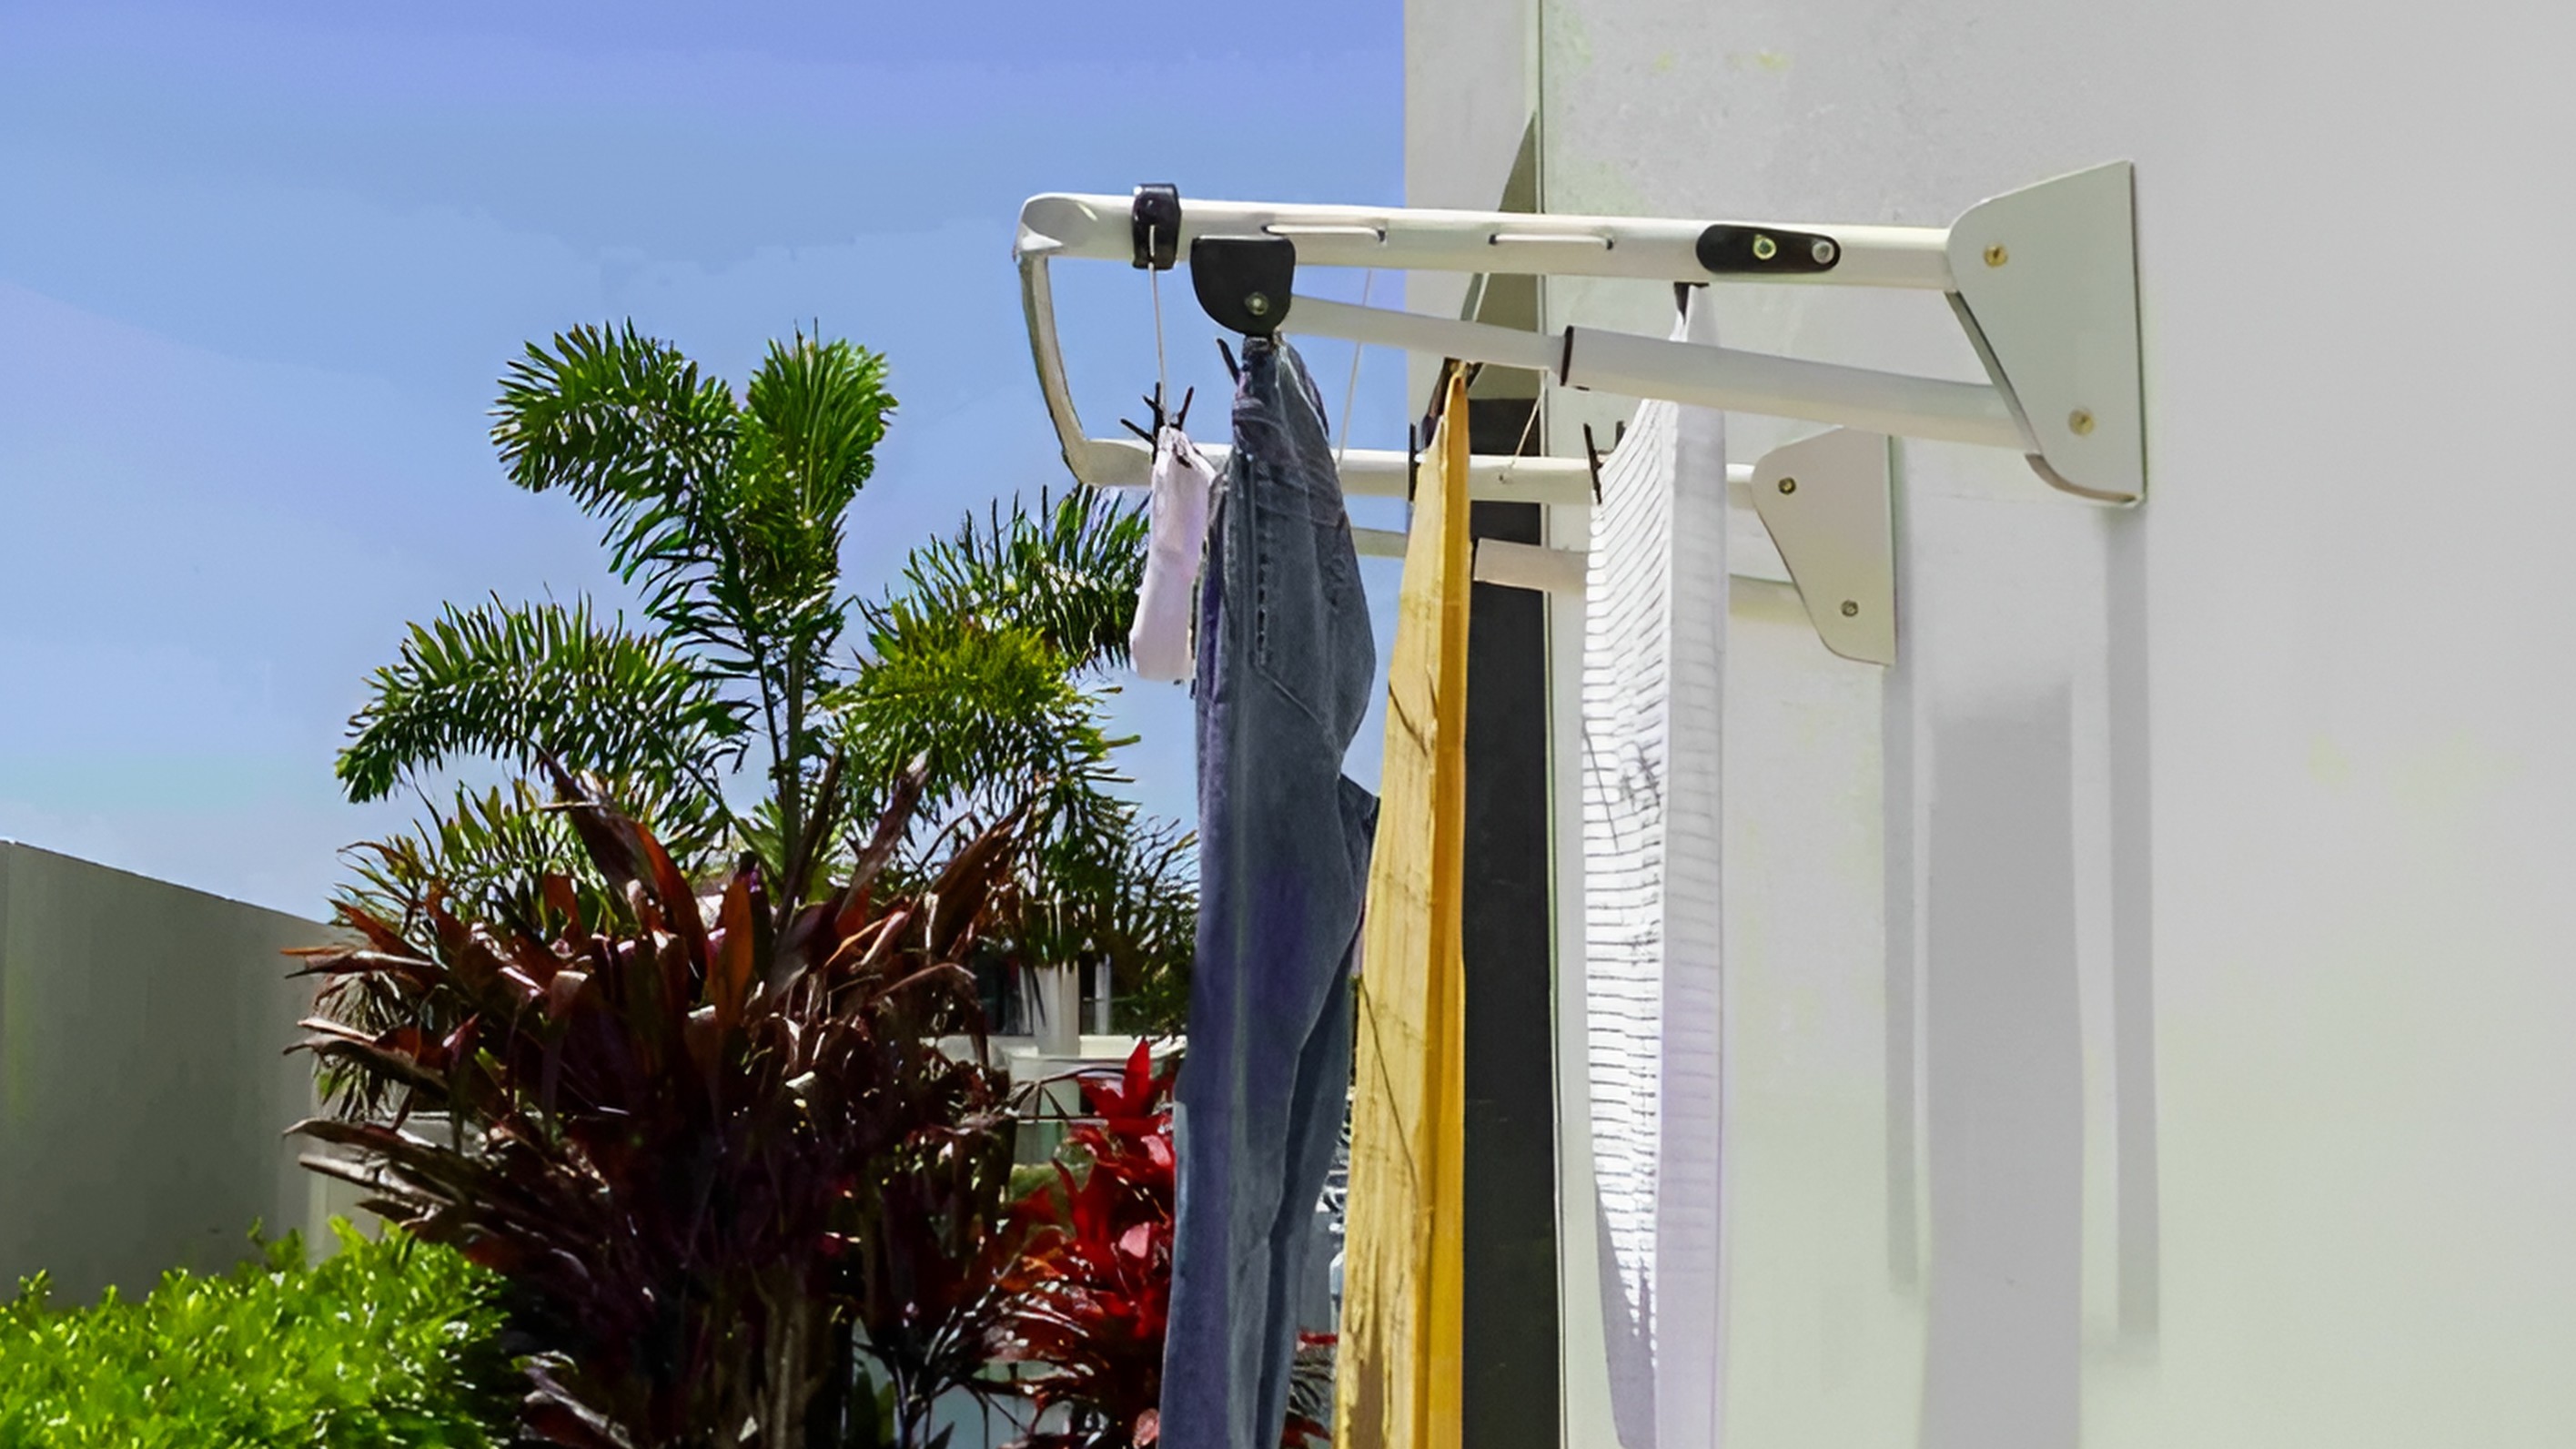 Maximize Your Space: 7 Best Clothesline Ideas for Small Spaces in Australia